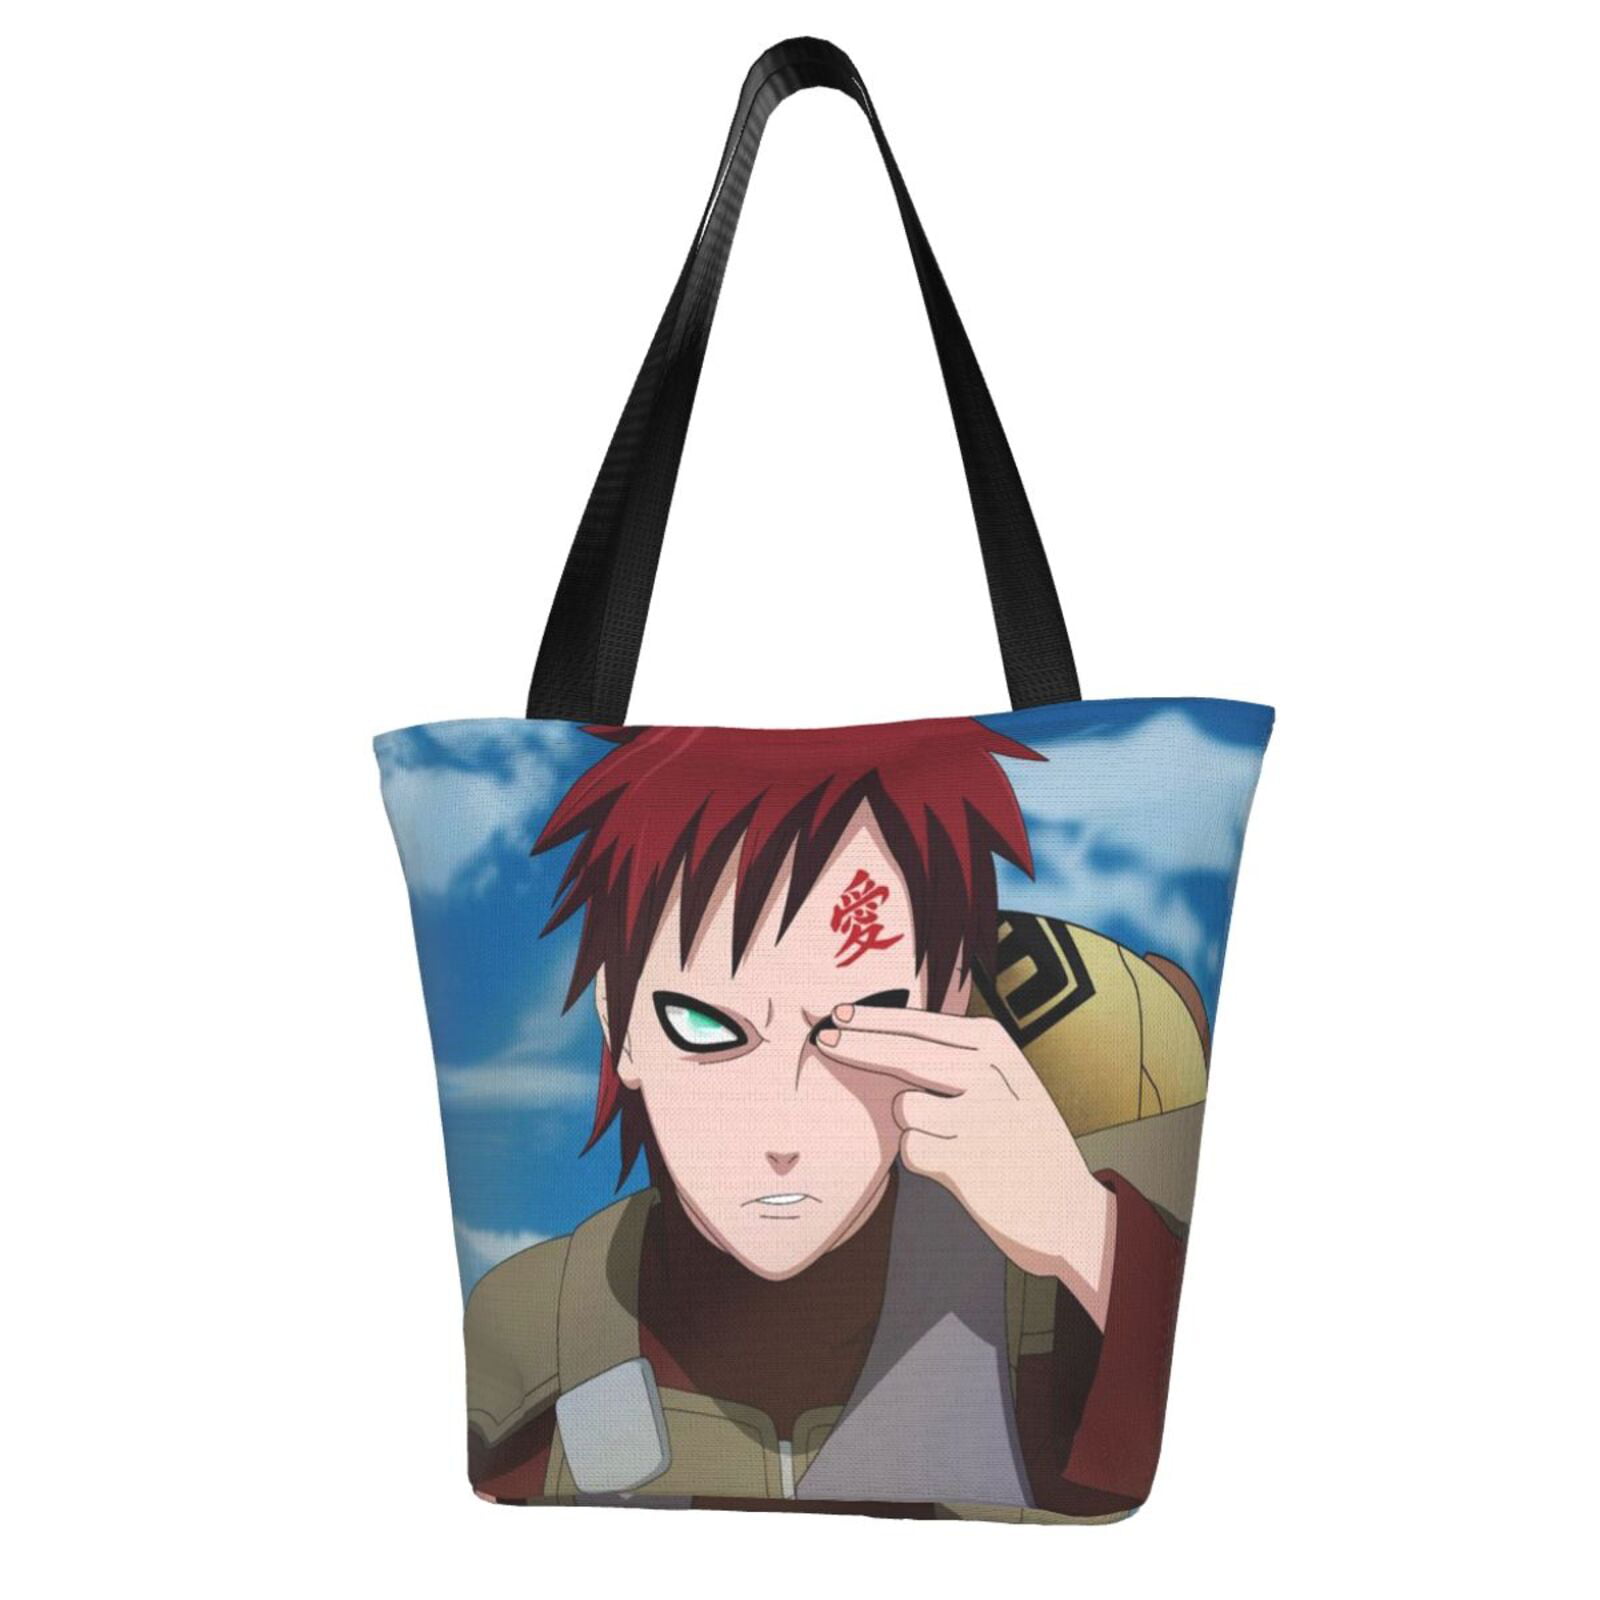 Small Chest Bags With Side Pockets Fashion Travel School Shoulder Bags Narutosling MenS And WomenS Shoulder Bags